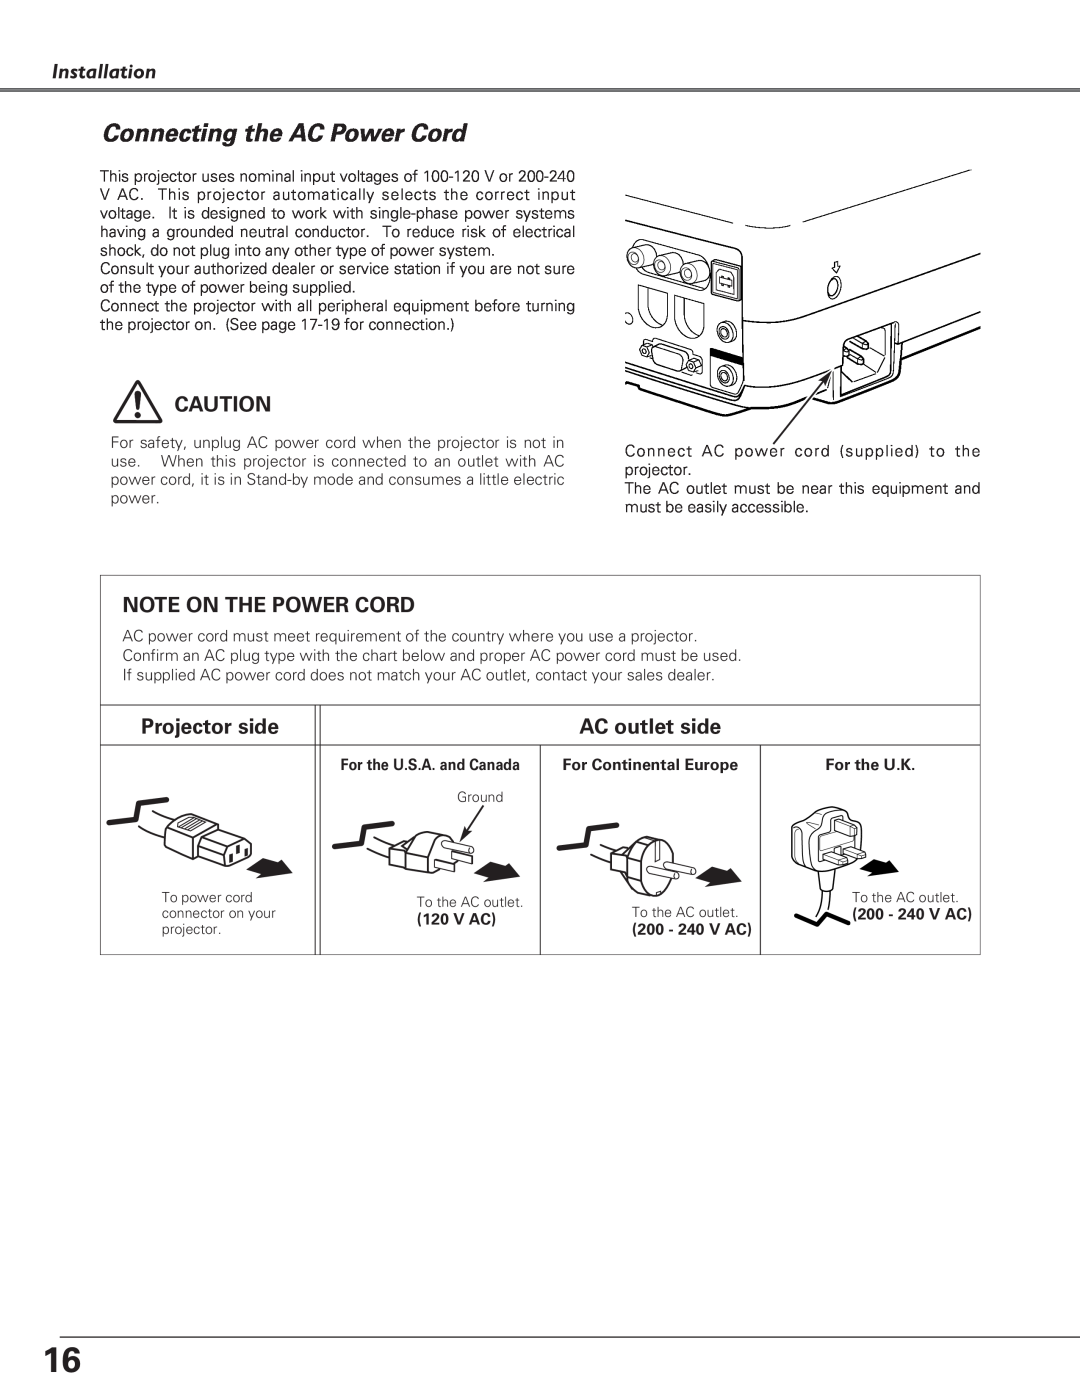 Sanyo PLC-XU51 Connecting the AC Power Cord, Installation, Note On The Power Cord, Projector side, AC outlet side, V Ac 